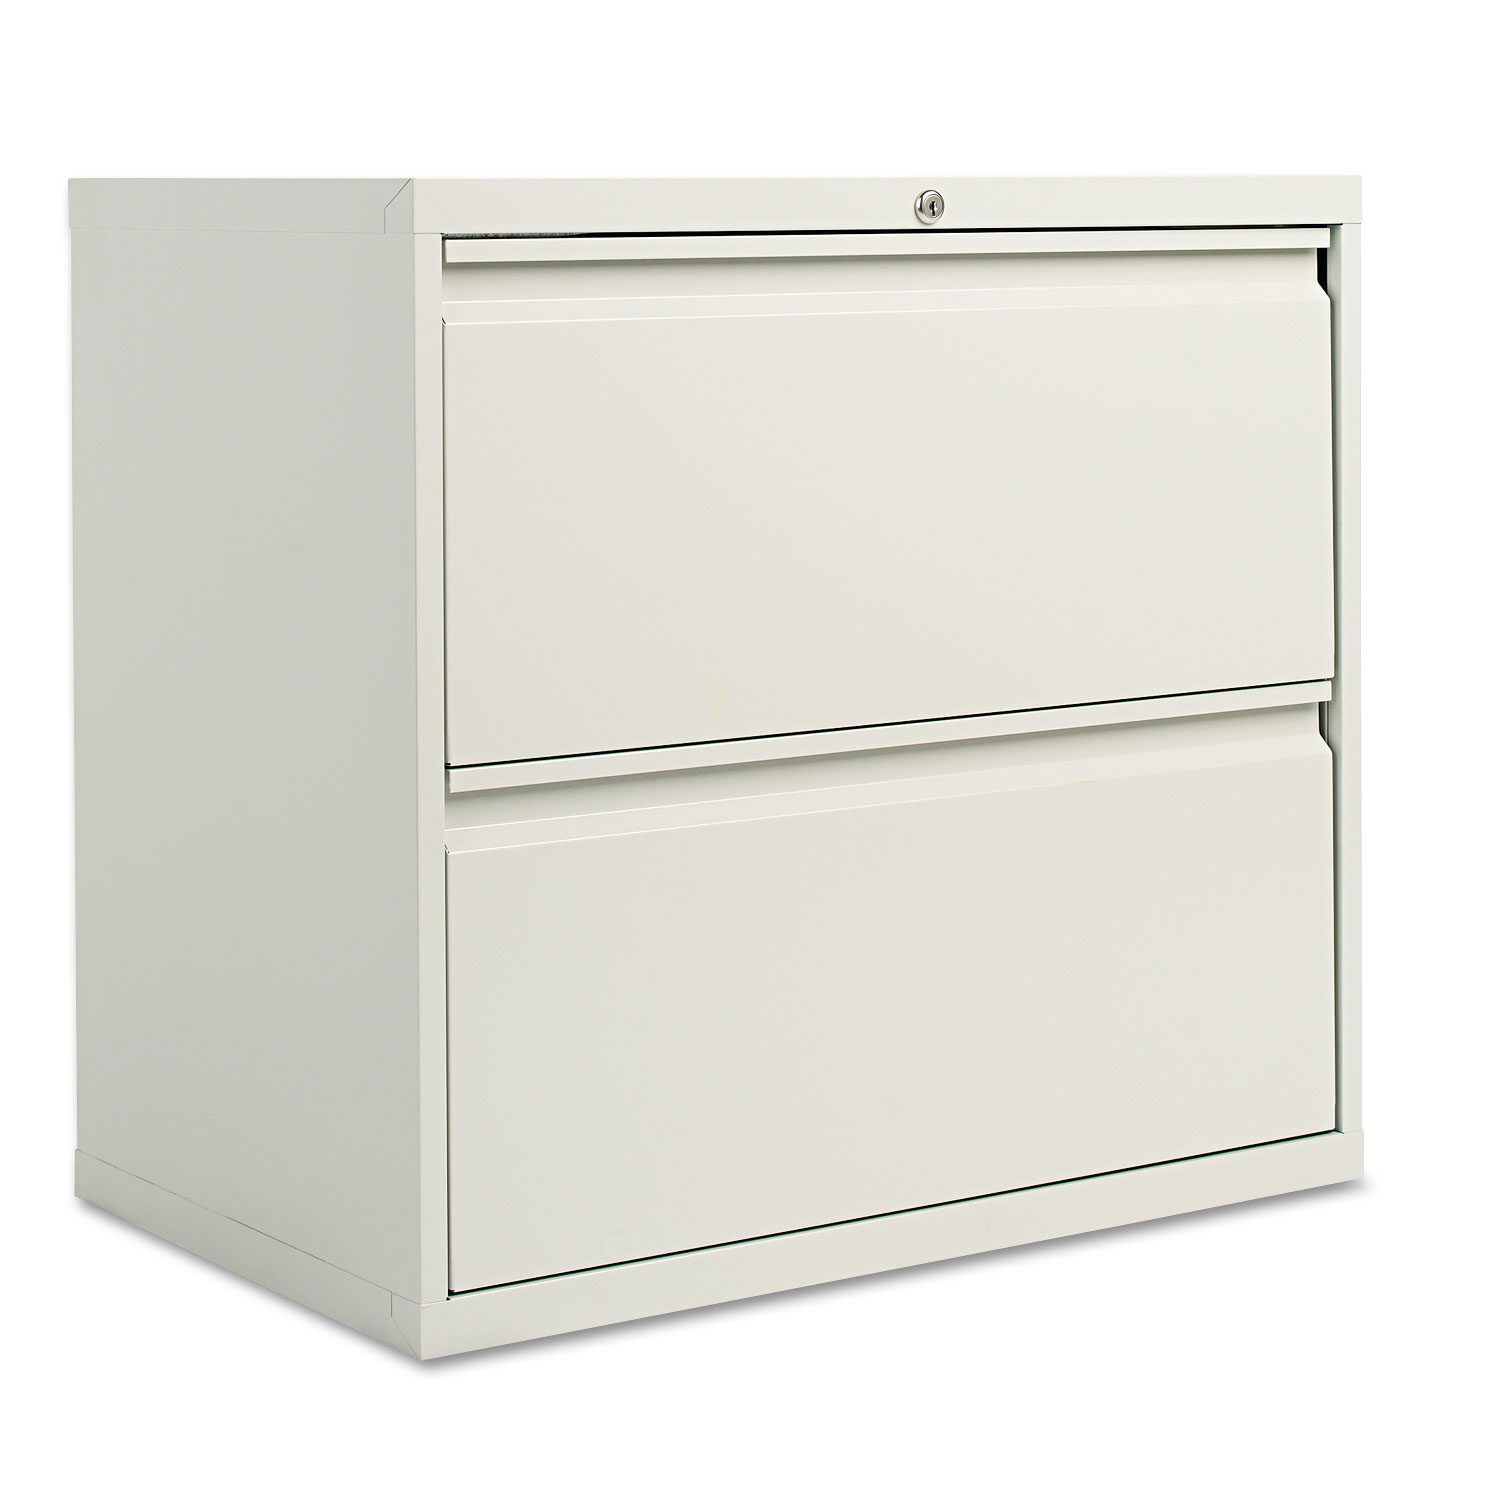  Alera ALELF3029LG Two-Drawer Lateral File Cabinet, 30w x 18d x 28h, Light Gray (ALELF3029LG) 